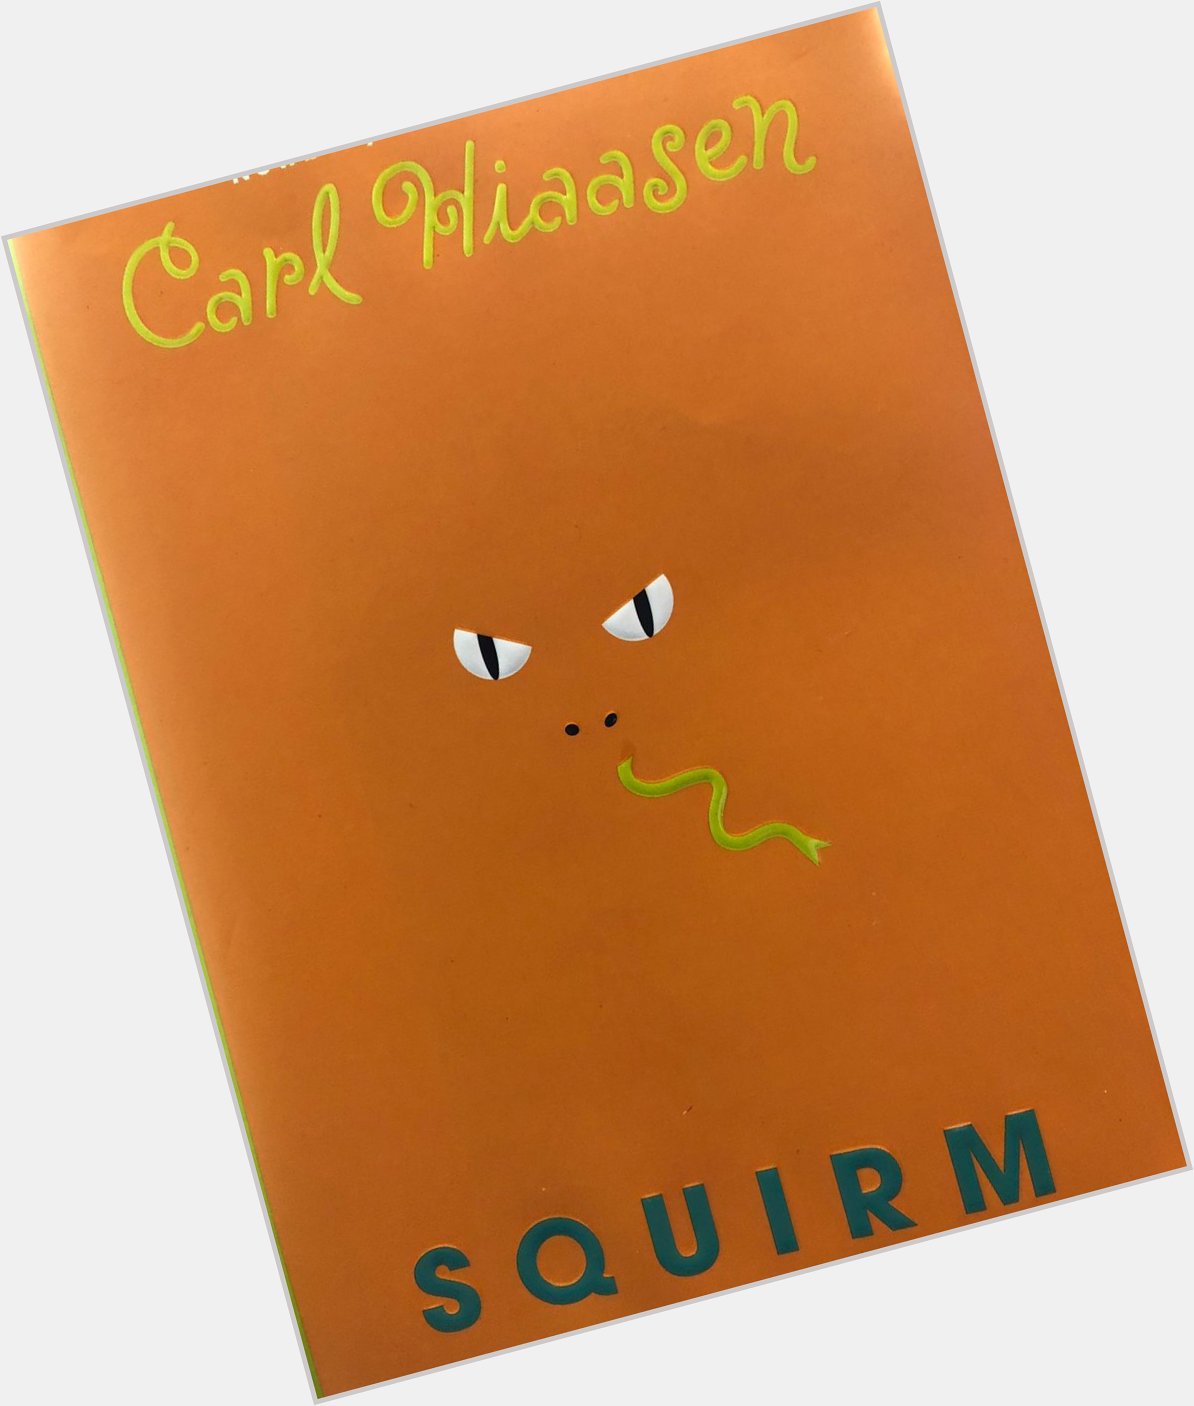 Happy Birthday Carl Hiaasen! Have you read Squirm? Highly entertaining, yet insightful! 